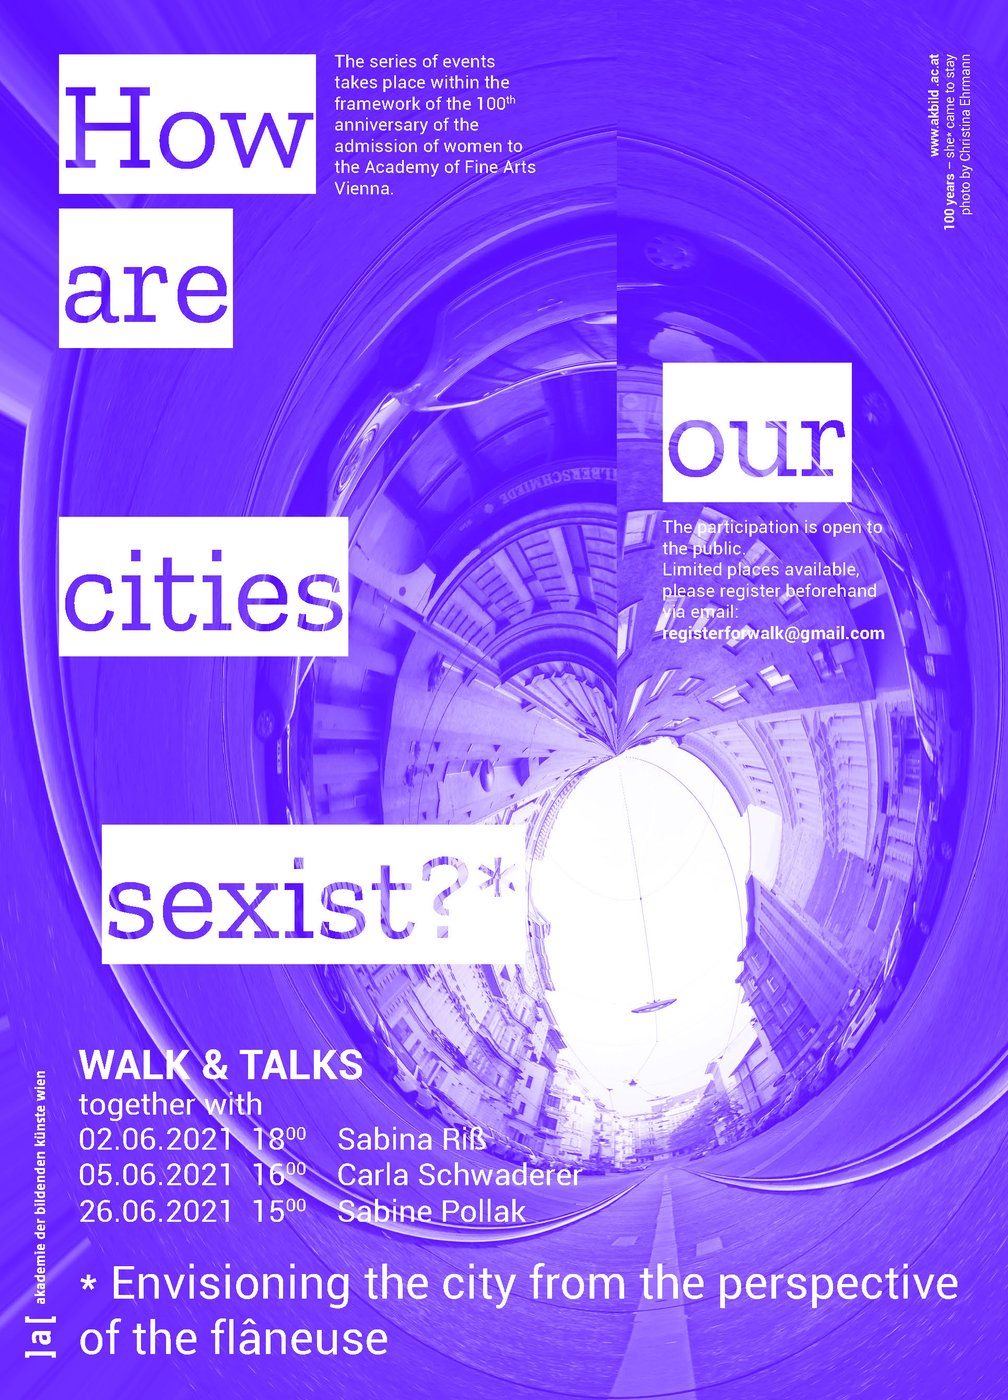 Purple Flyer with the Title "How are our cities sexist?" with Date Information on all Walk and Talks